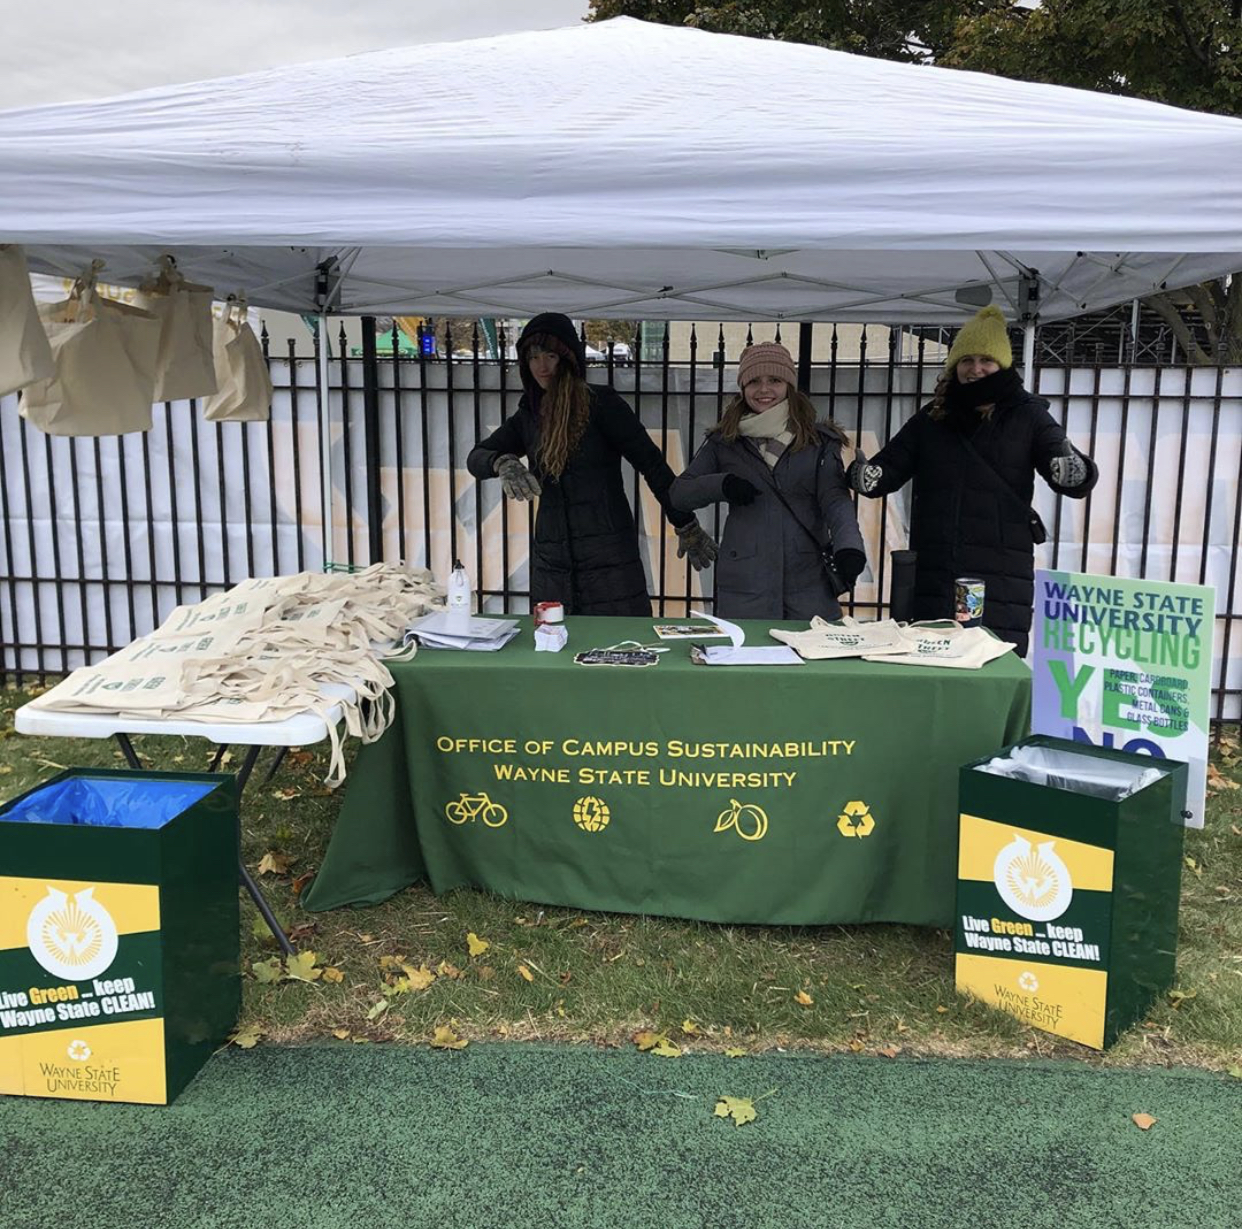 Three student interns in winter gear standing under a white canopy tent urging others to learn more about the Office of Campus Sustainability